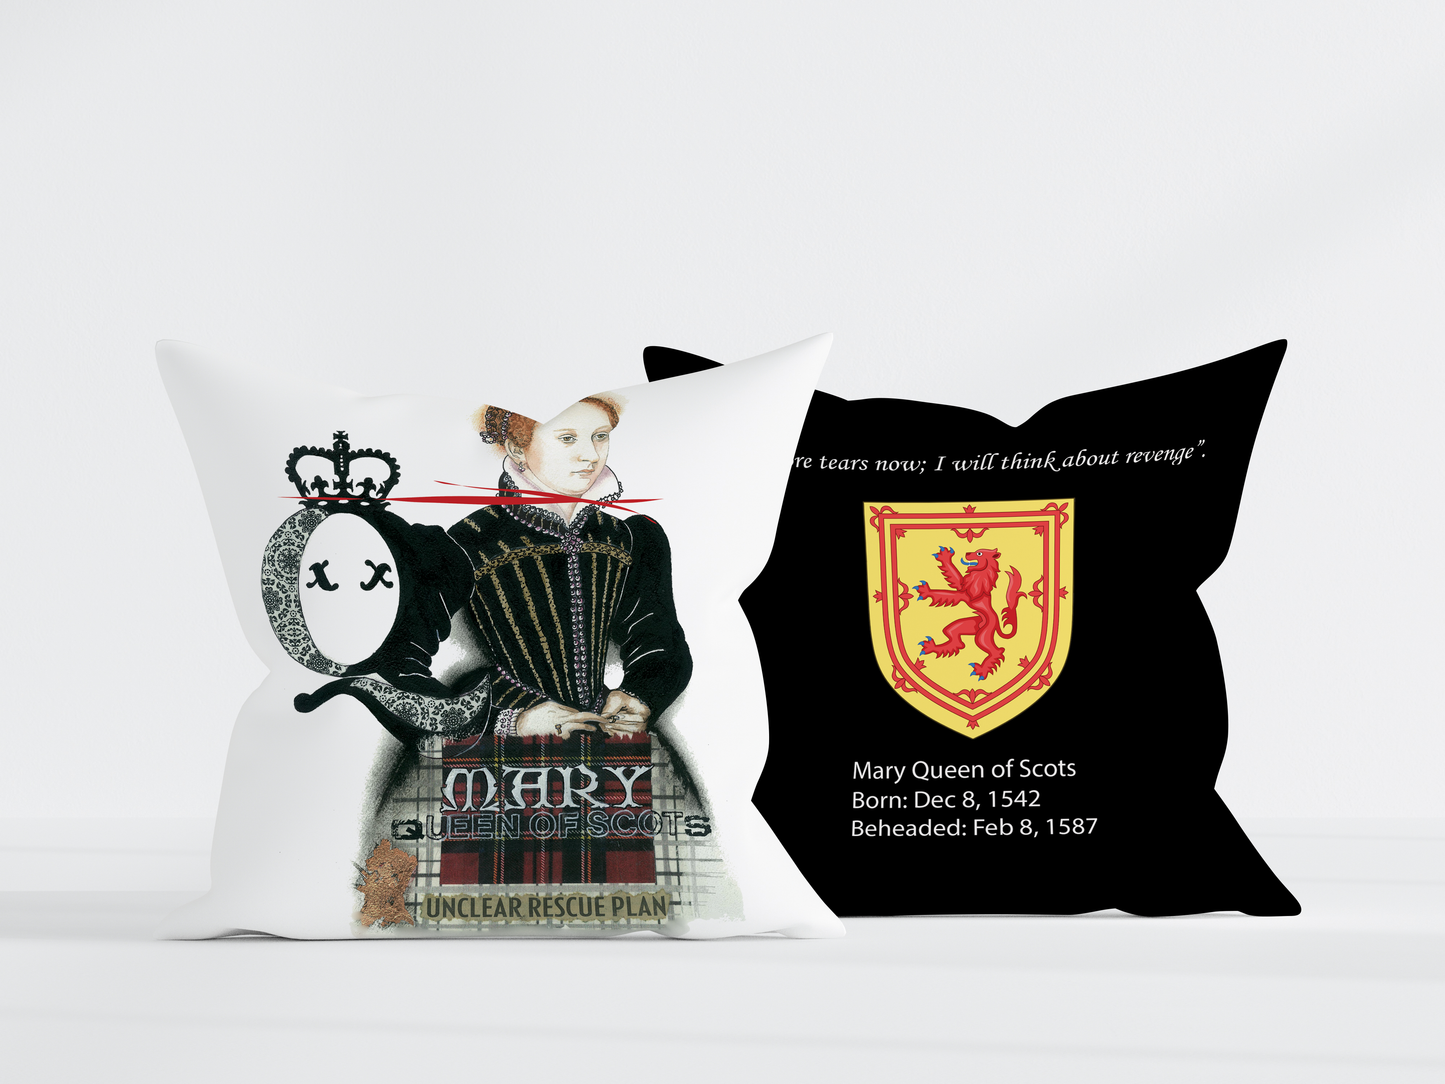 Mary Queen of Scots Pillow - Black Back - 22x22